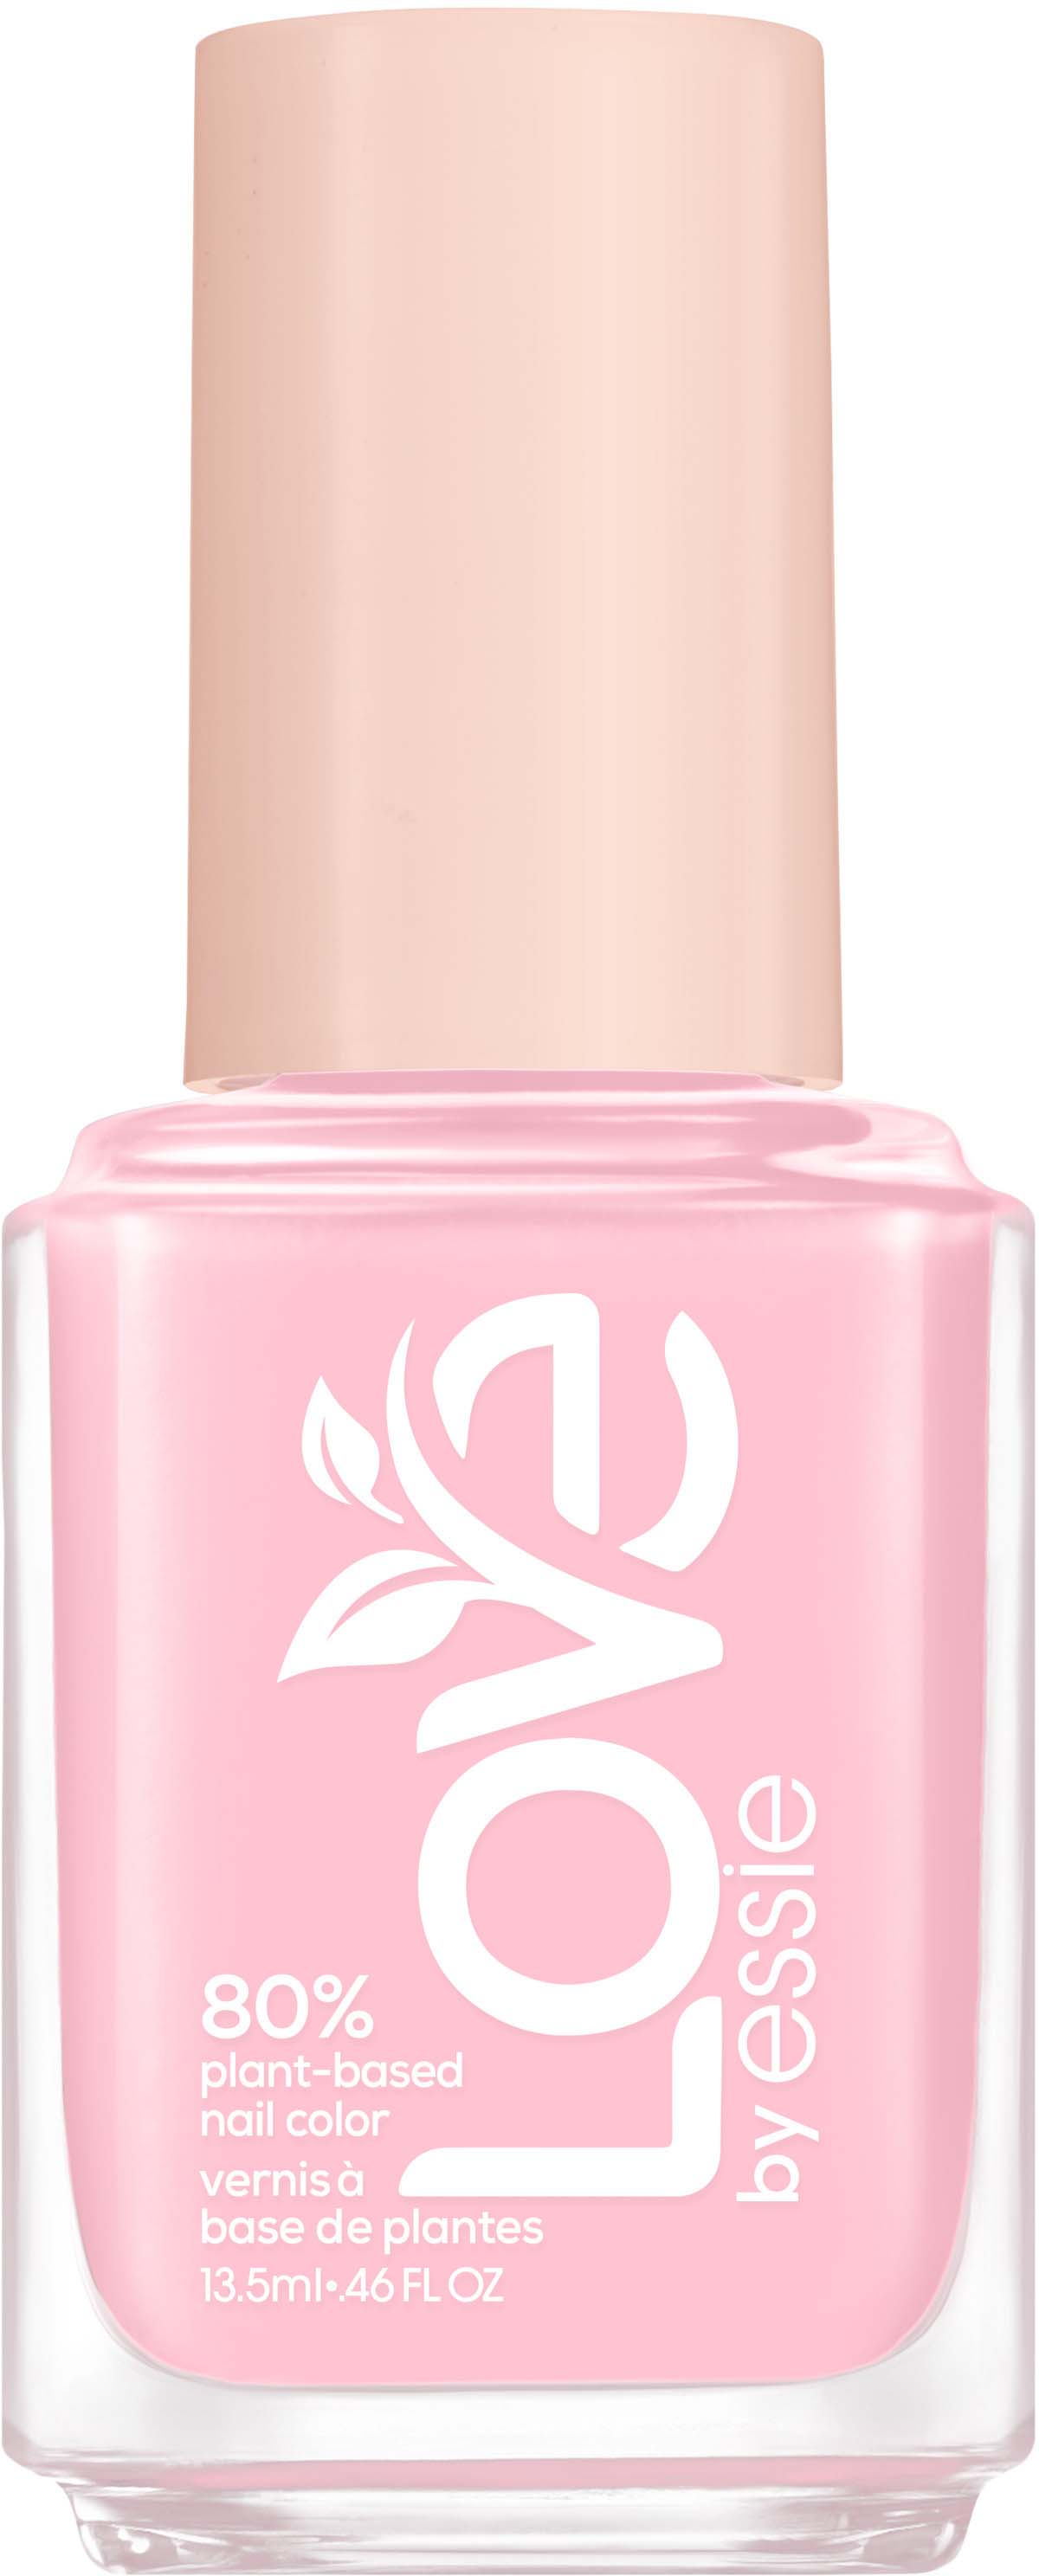 Essie LOVE by Essie 80% Plant-based 130 Color Move Nail Make The